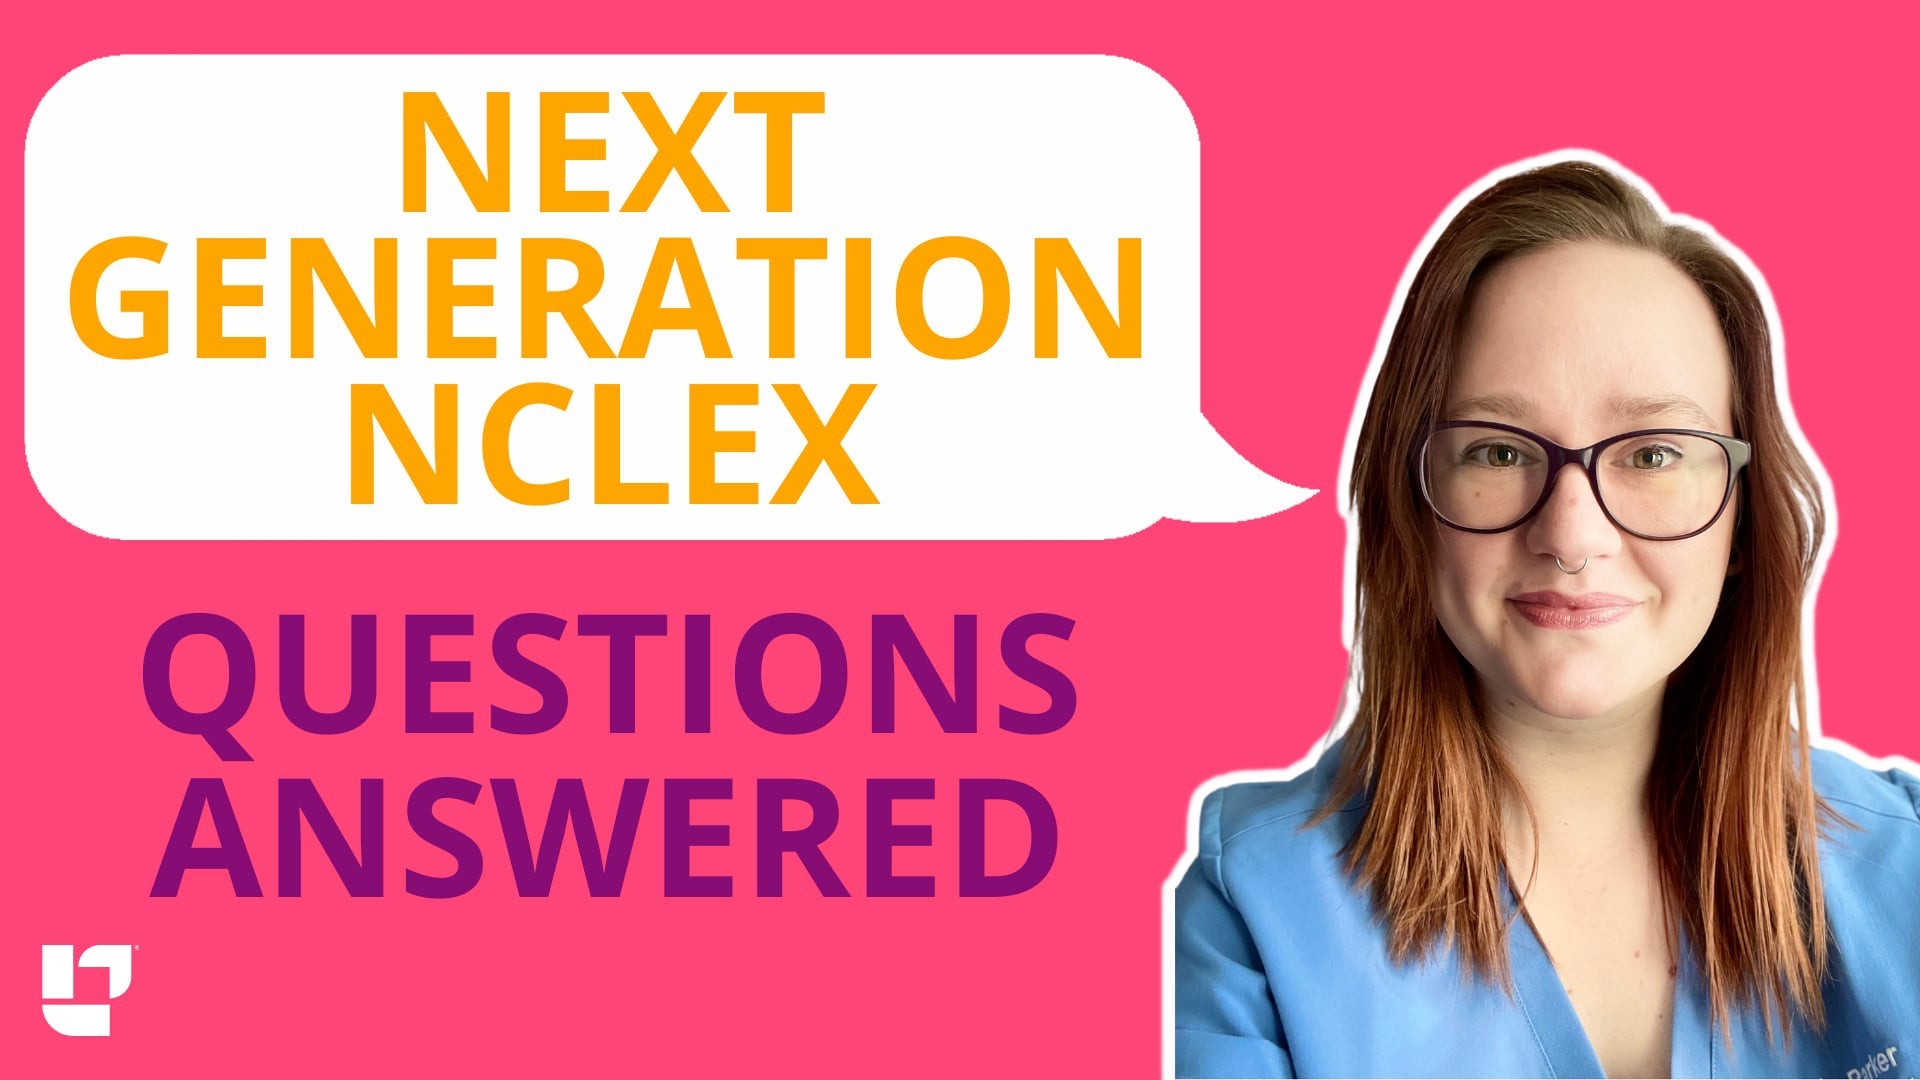 Next Generation NCLEX: Your Questions Answered - LevelUpRN